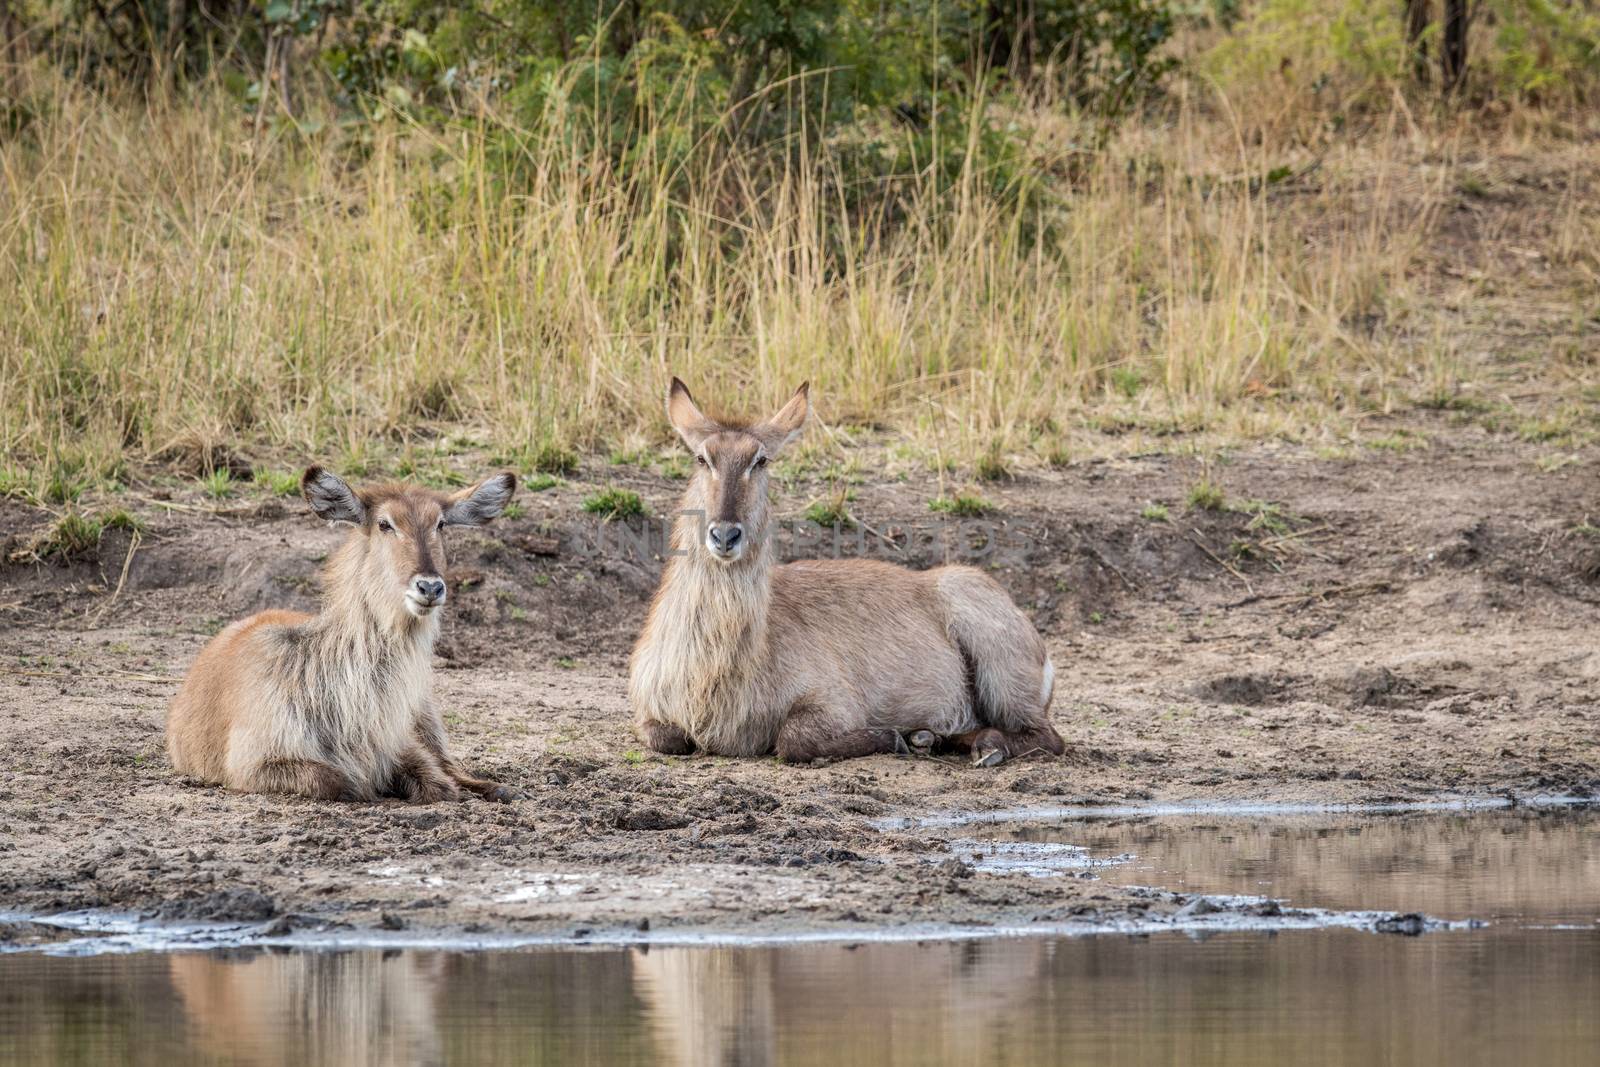 Two Waterbucks laying next to the water in the Kruger. by Simoneemanphotography